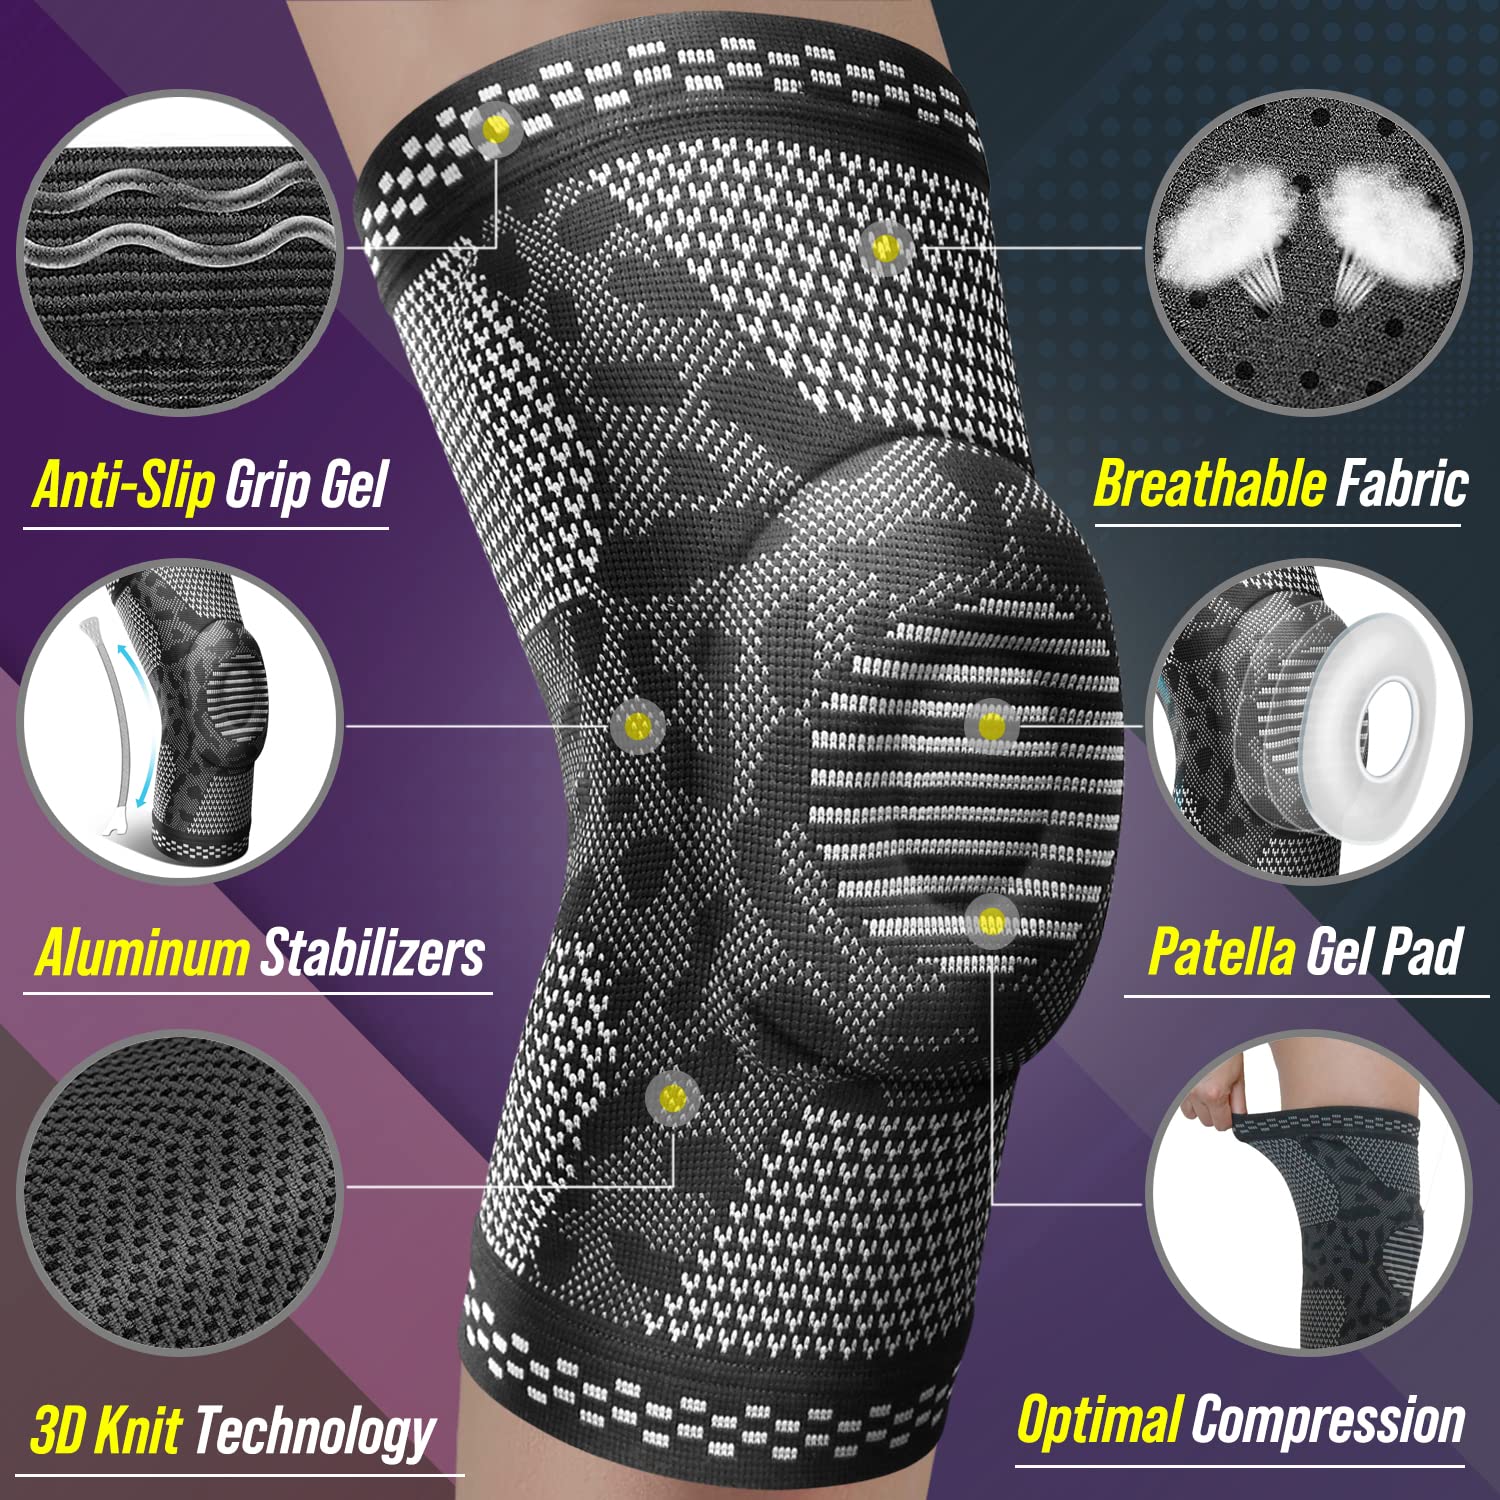 BLITZU Knee Brace, Knee Compression Sleeve Support with Patella Gel Pad & Stabilizers, Medical Grade Knee Protector for Running, Meniscus Tear, Arthritis, Joint Pain Relief, ACL, Injury Recovery.